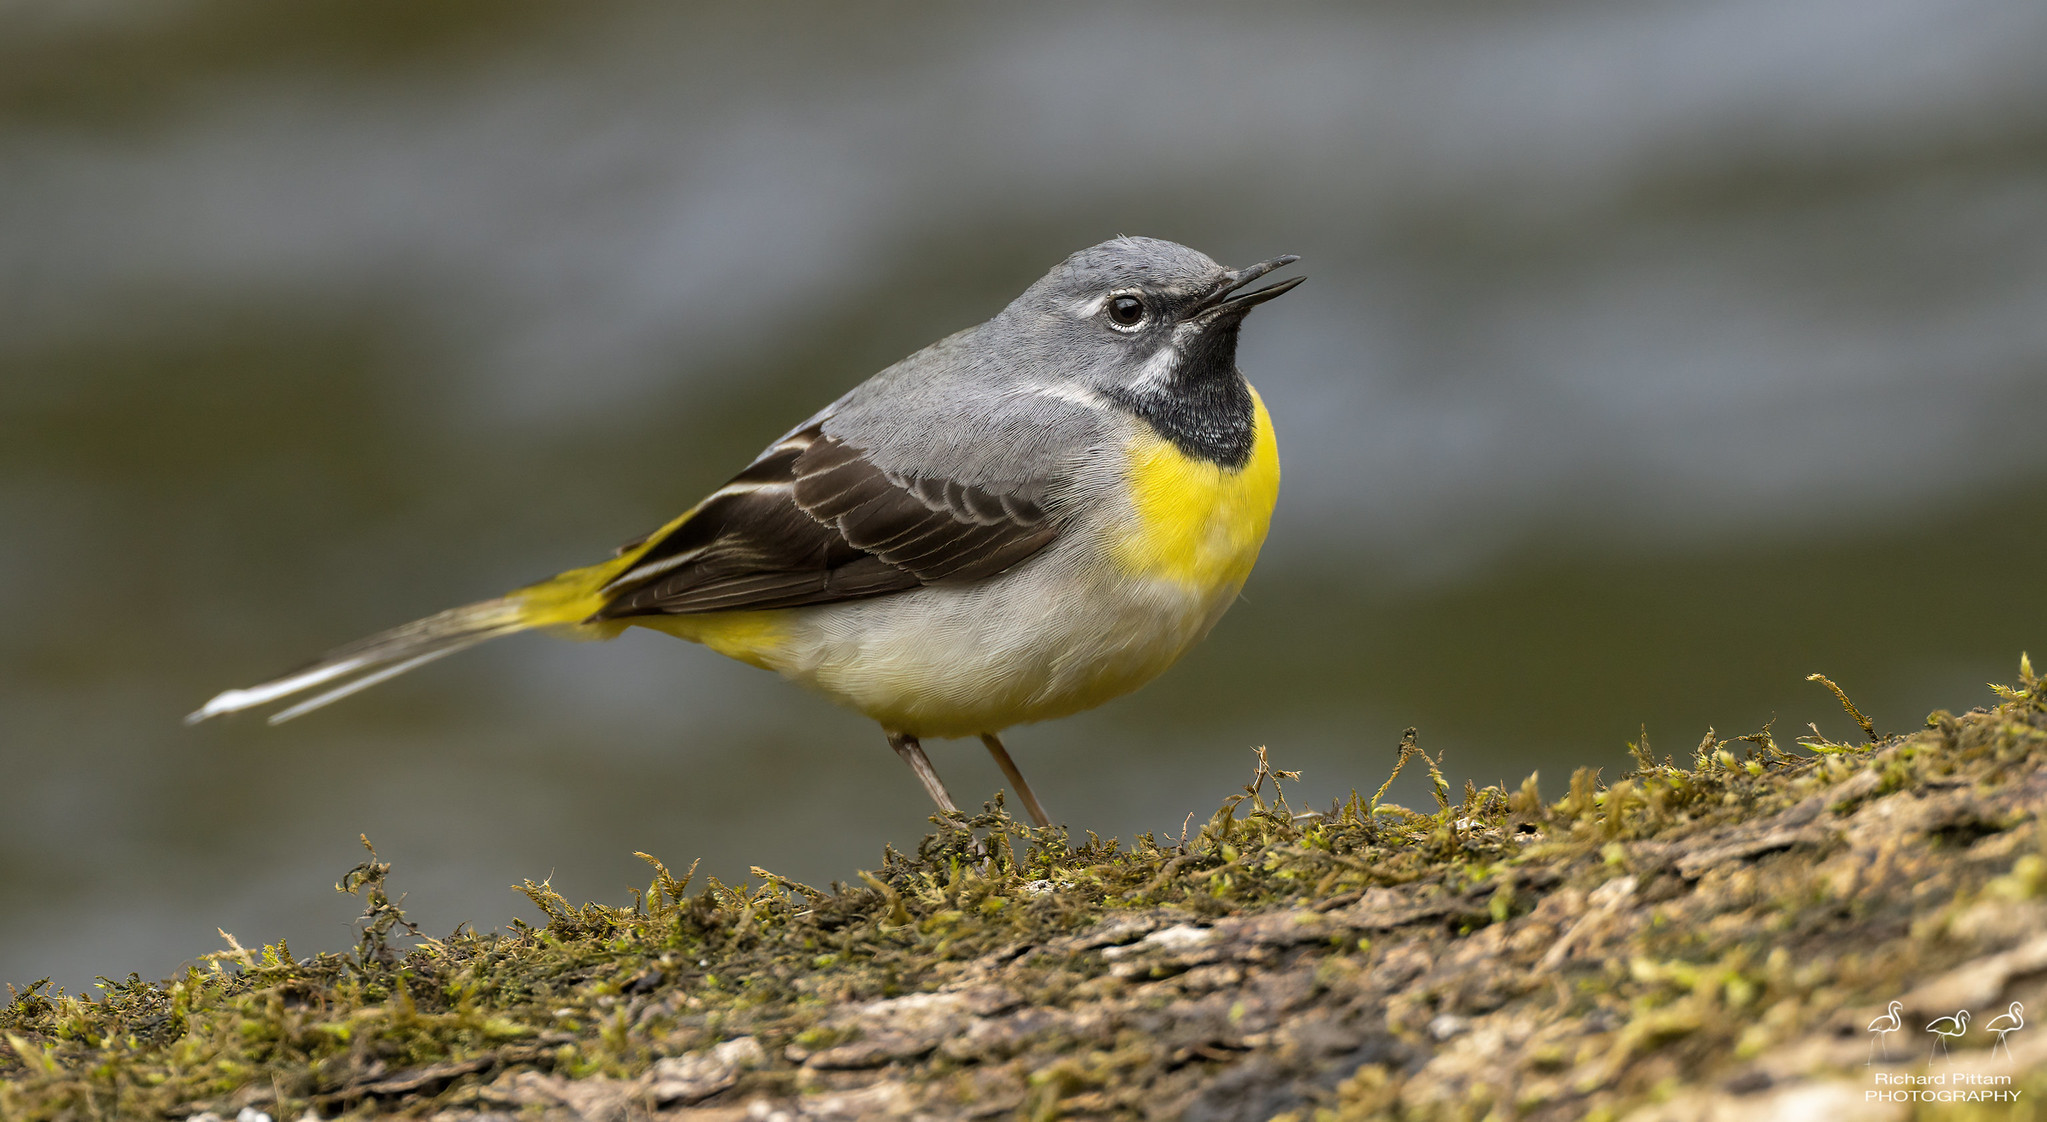 Grey Wagtail - I don’t think I’ve seen them with such a lemon yellow, but that’s what it was. A bright male I’m guessing….